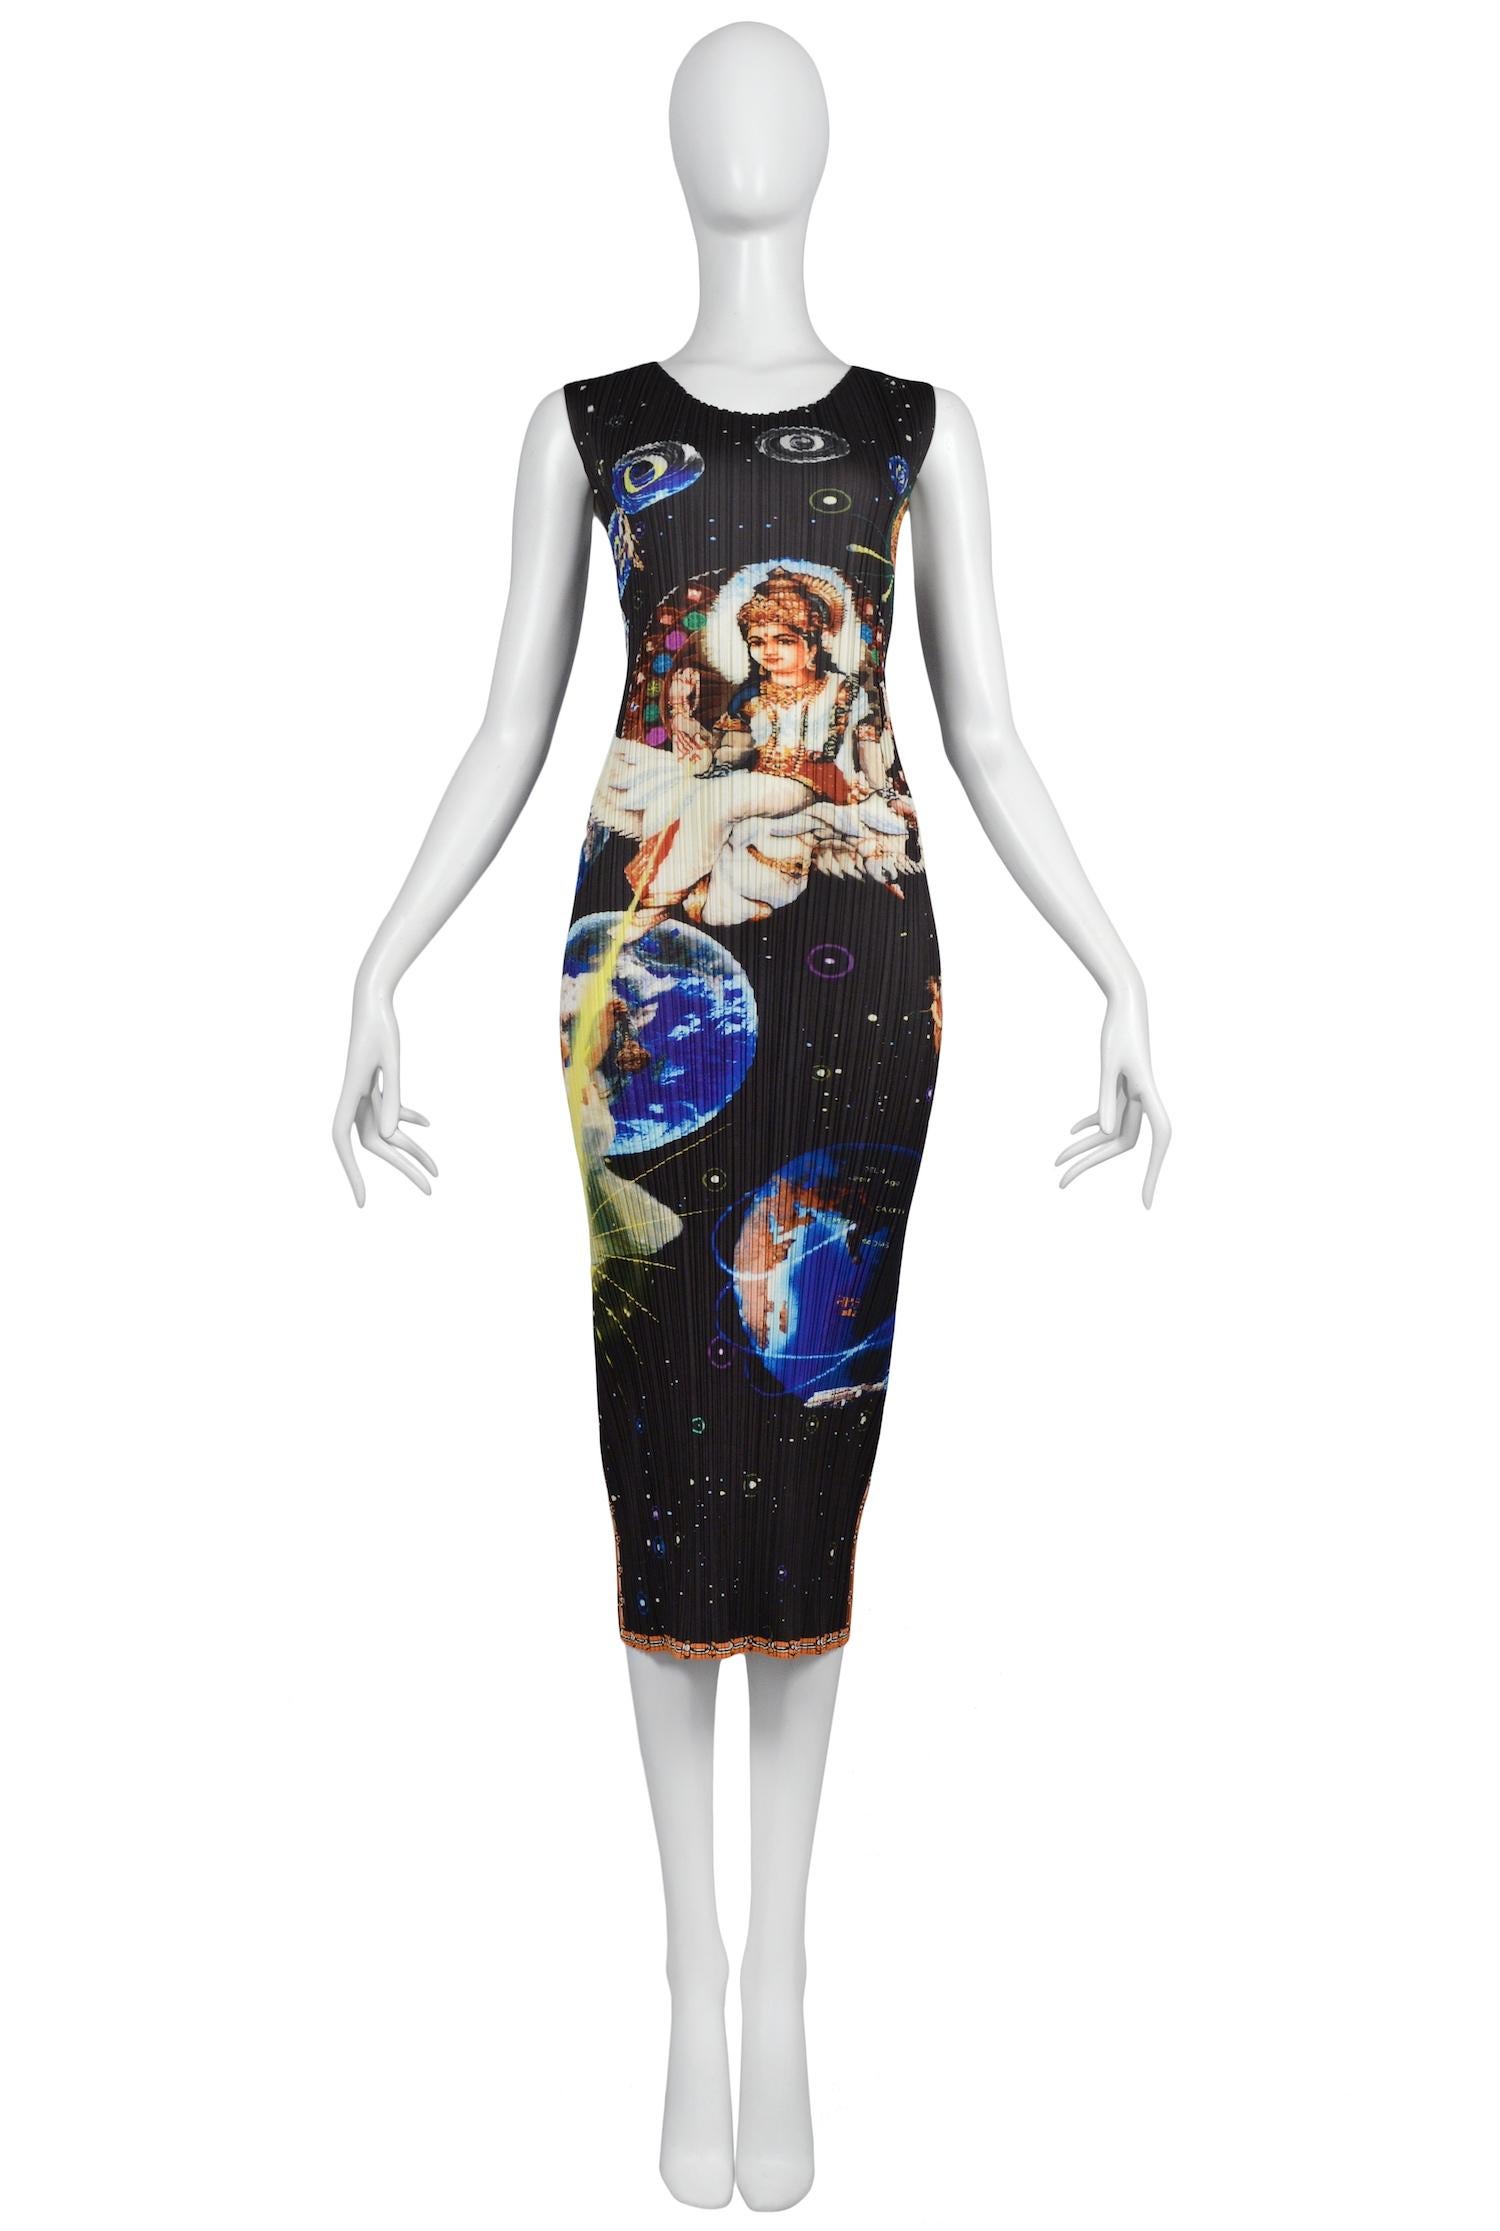 Vintage Issey Miyake black pleated dress featuring a multicolored space galaxy print. From the Pleats Please Collection.

Excellent Vintage Condition.

No Size Label